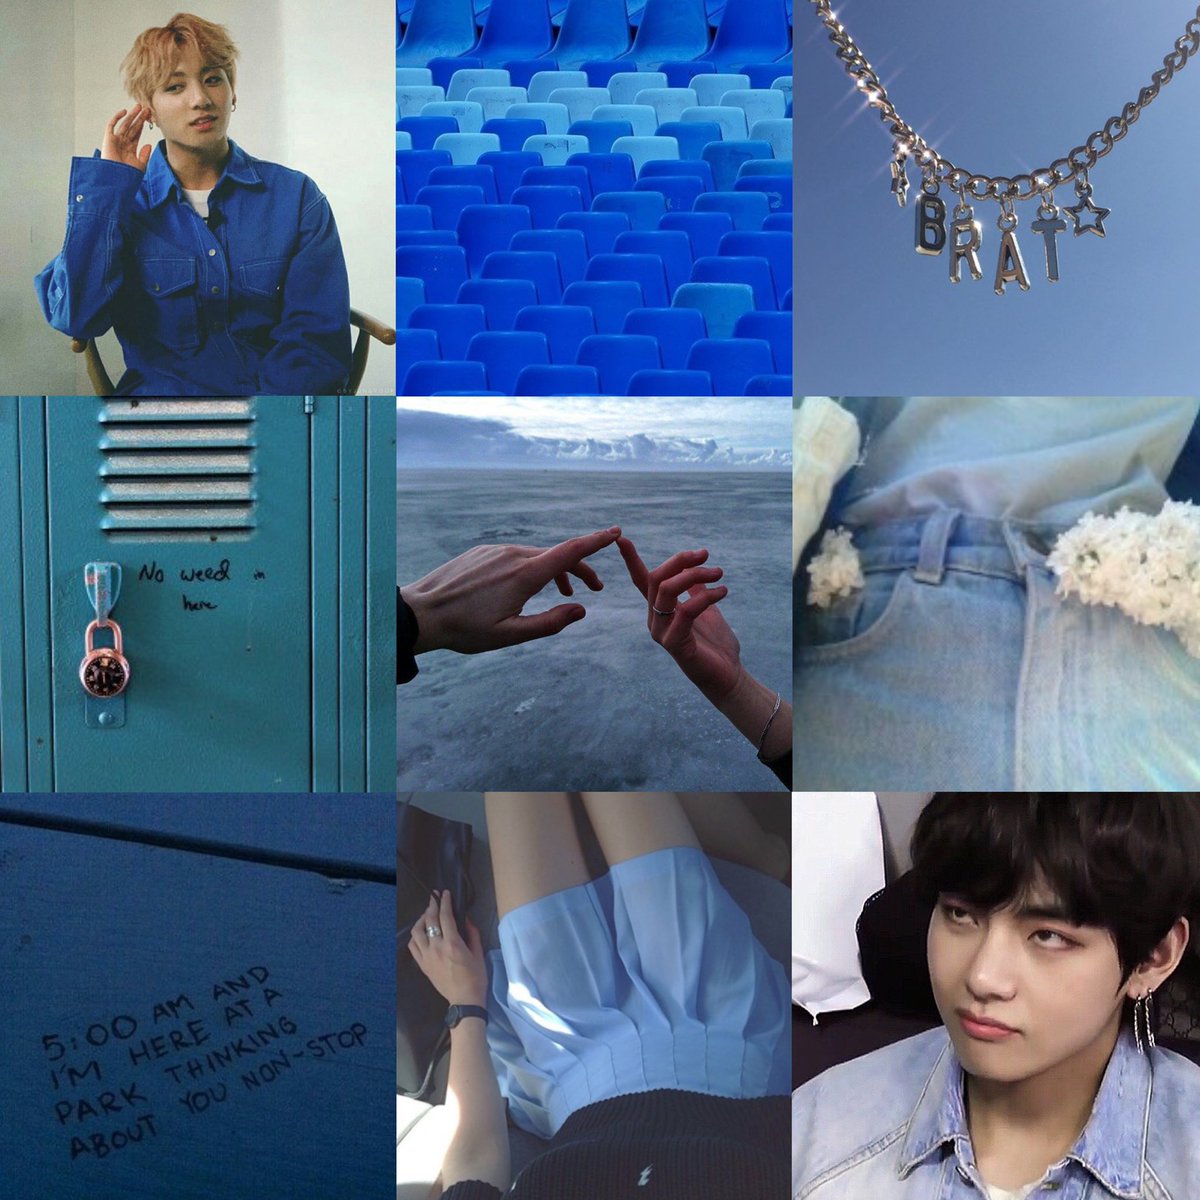 Au; jeongguk is the schools popular jock and he does an interview w the schools news reporter and announces that he needs a date for prom hoping his crush would ask him. His crush being head cheerleader taehyung who pays absolutely no attention to the football player.